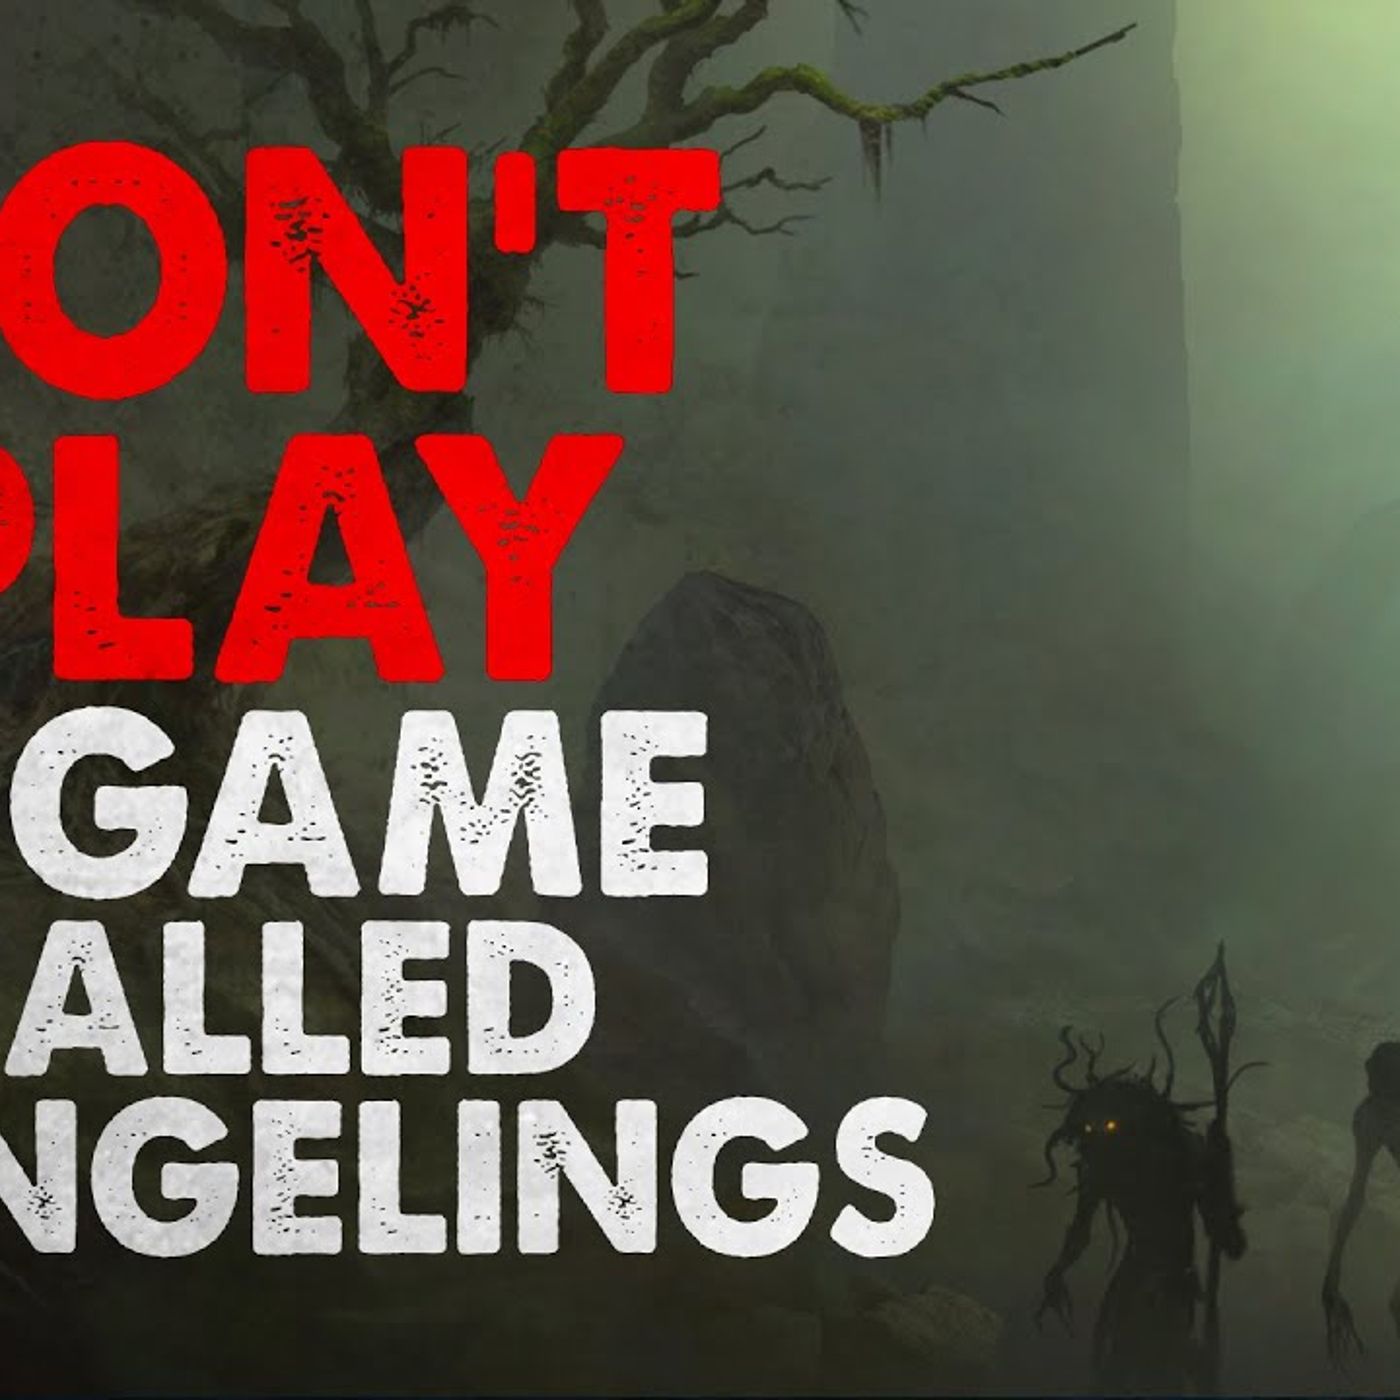 "DON'T play a game called Ch4ngelings" Creepypasta